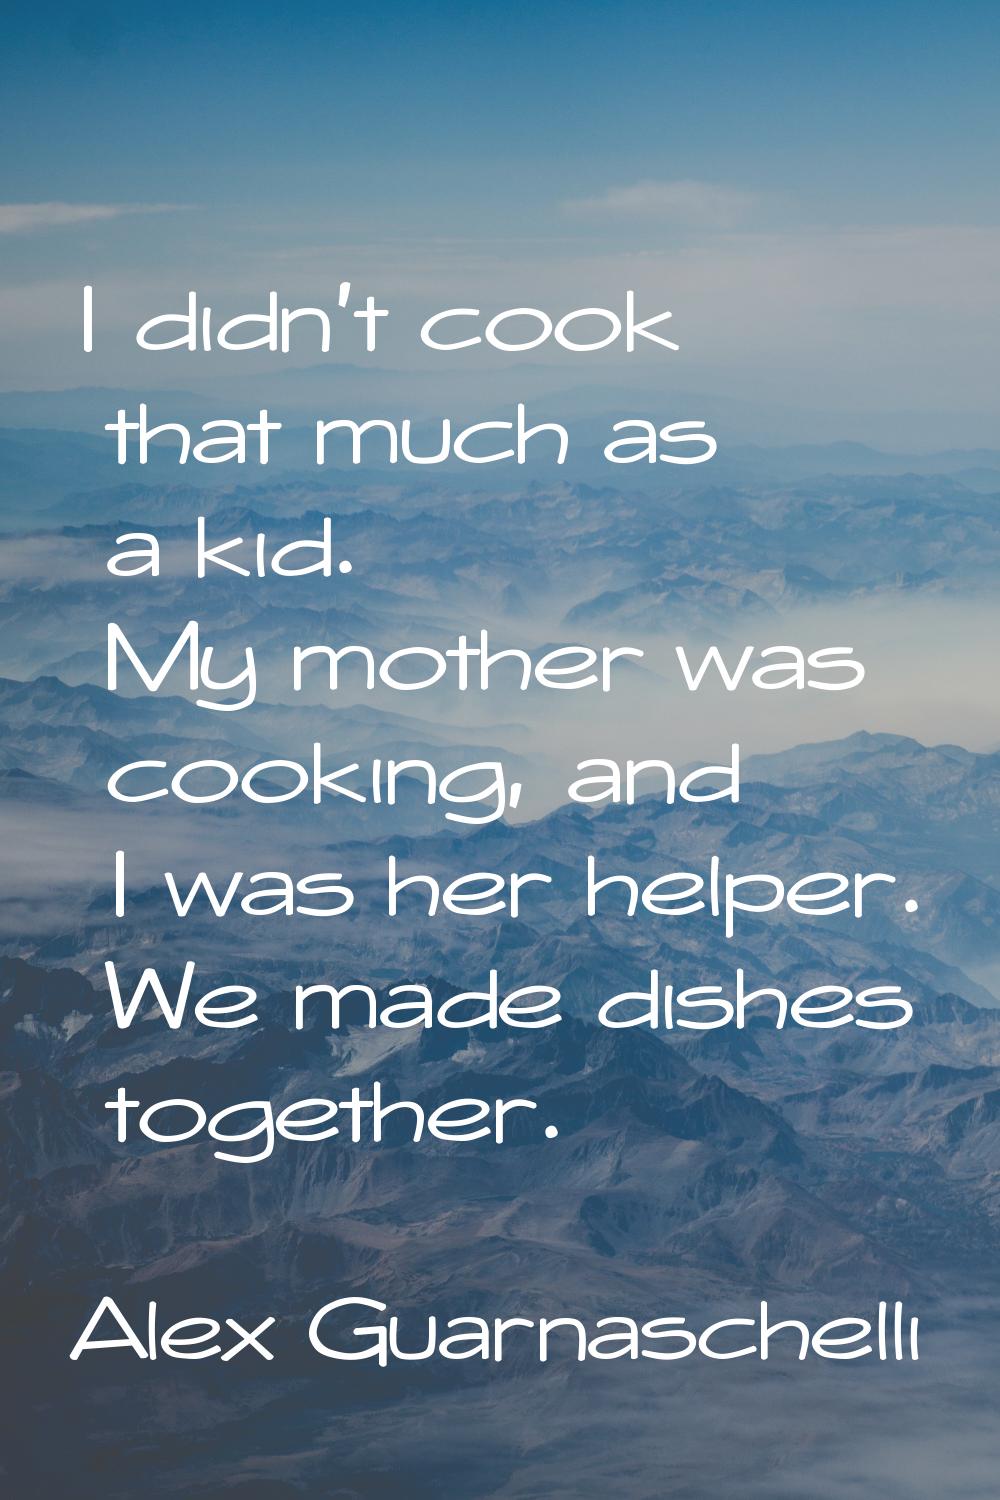 I didn't cook that much as a kid. My mother was cooking, and I was her helper. We made dishes toget